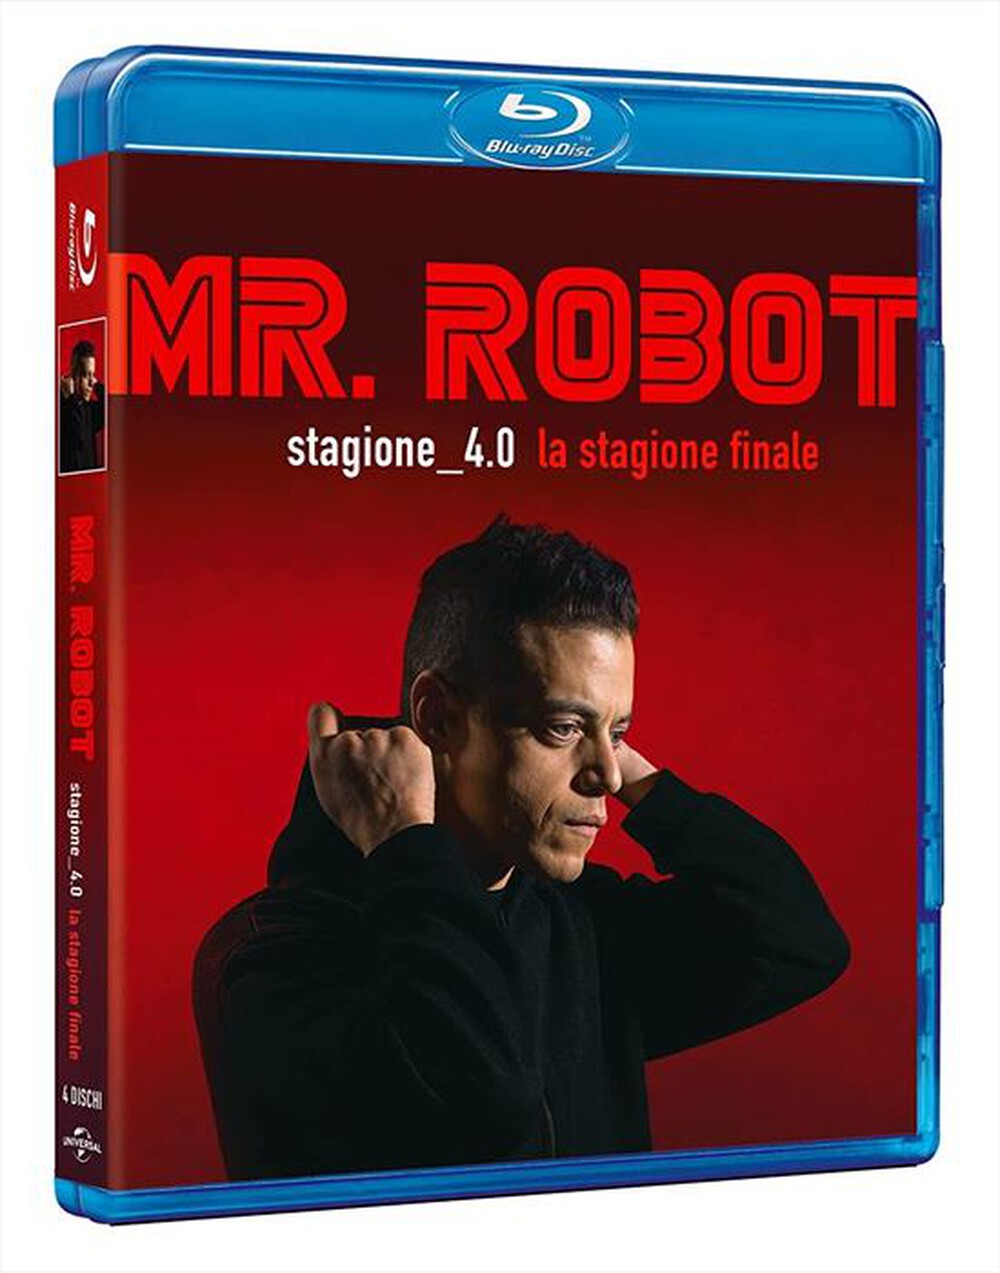 "UNIVERSAL PICTURES - Mr. Robot - Stagione 04 (4 Blu-Ray)"